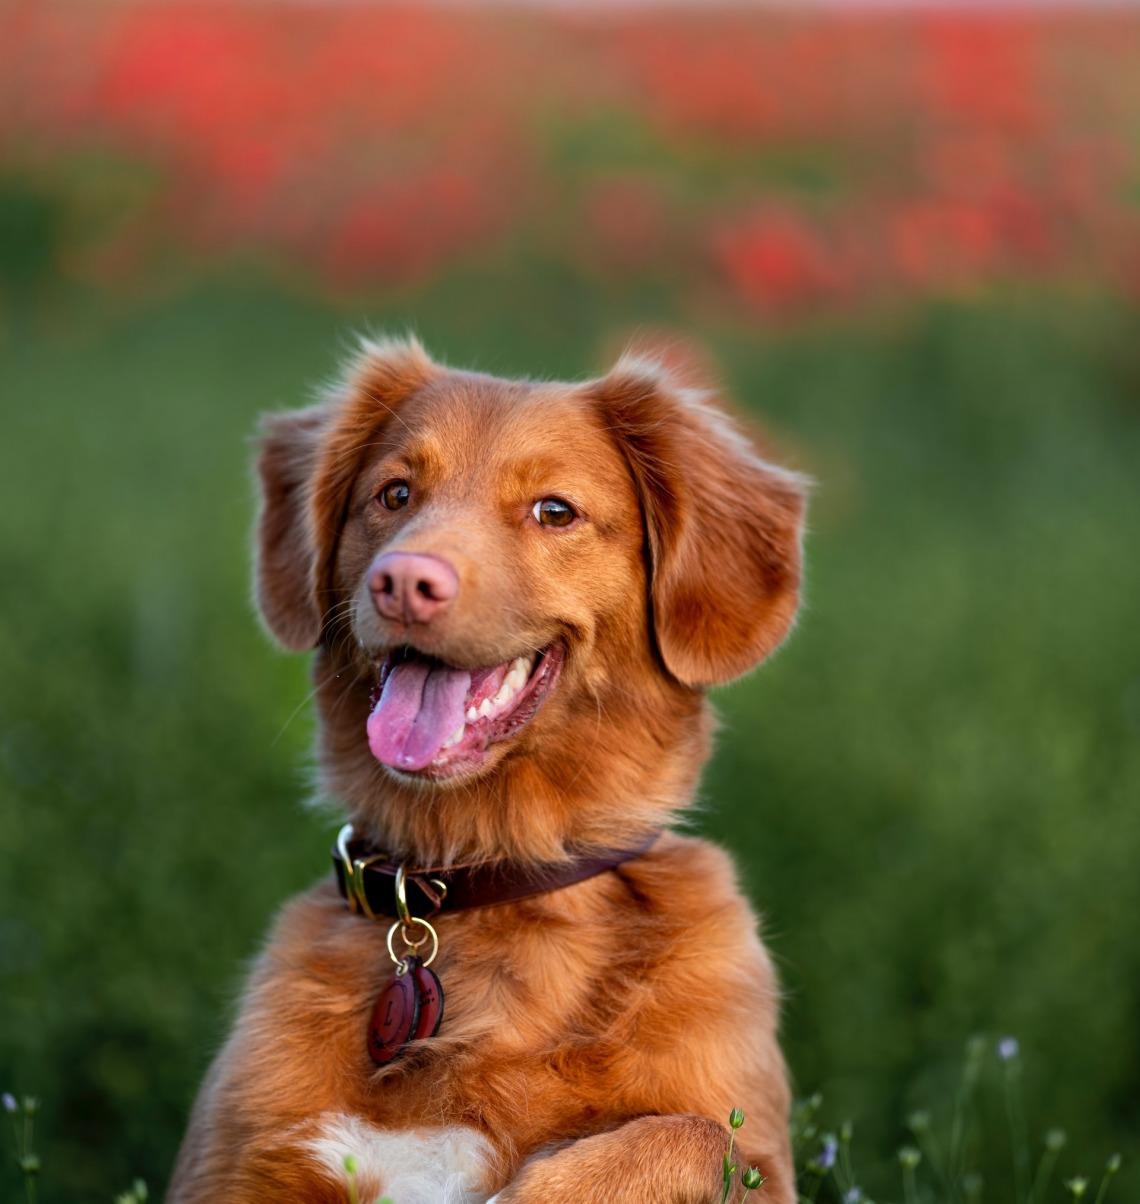 A tan dog stands in a grassy field and looks happy.